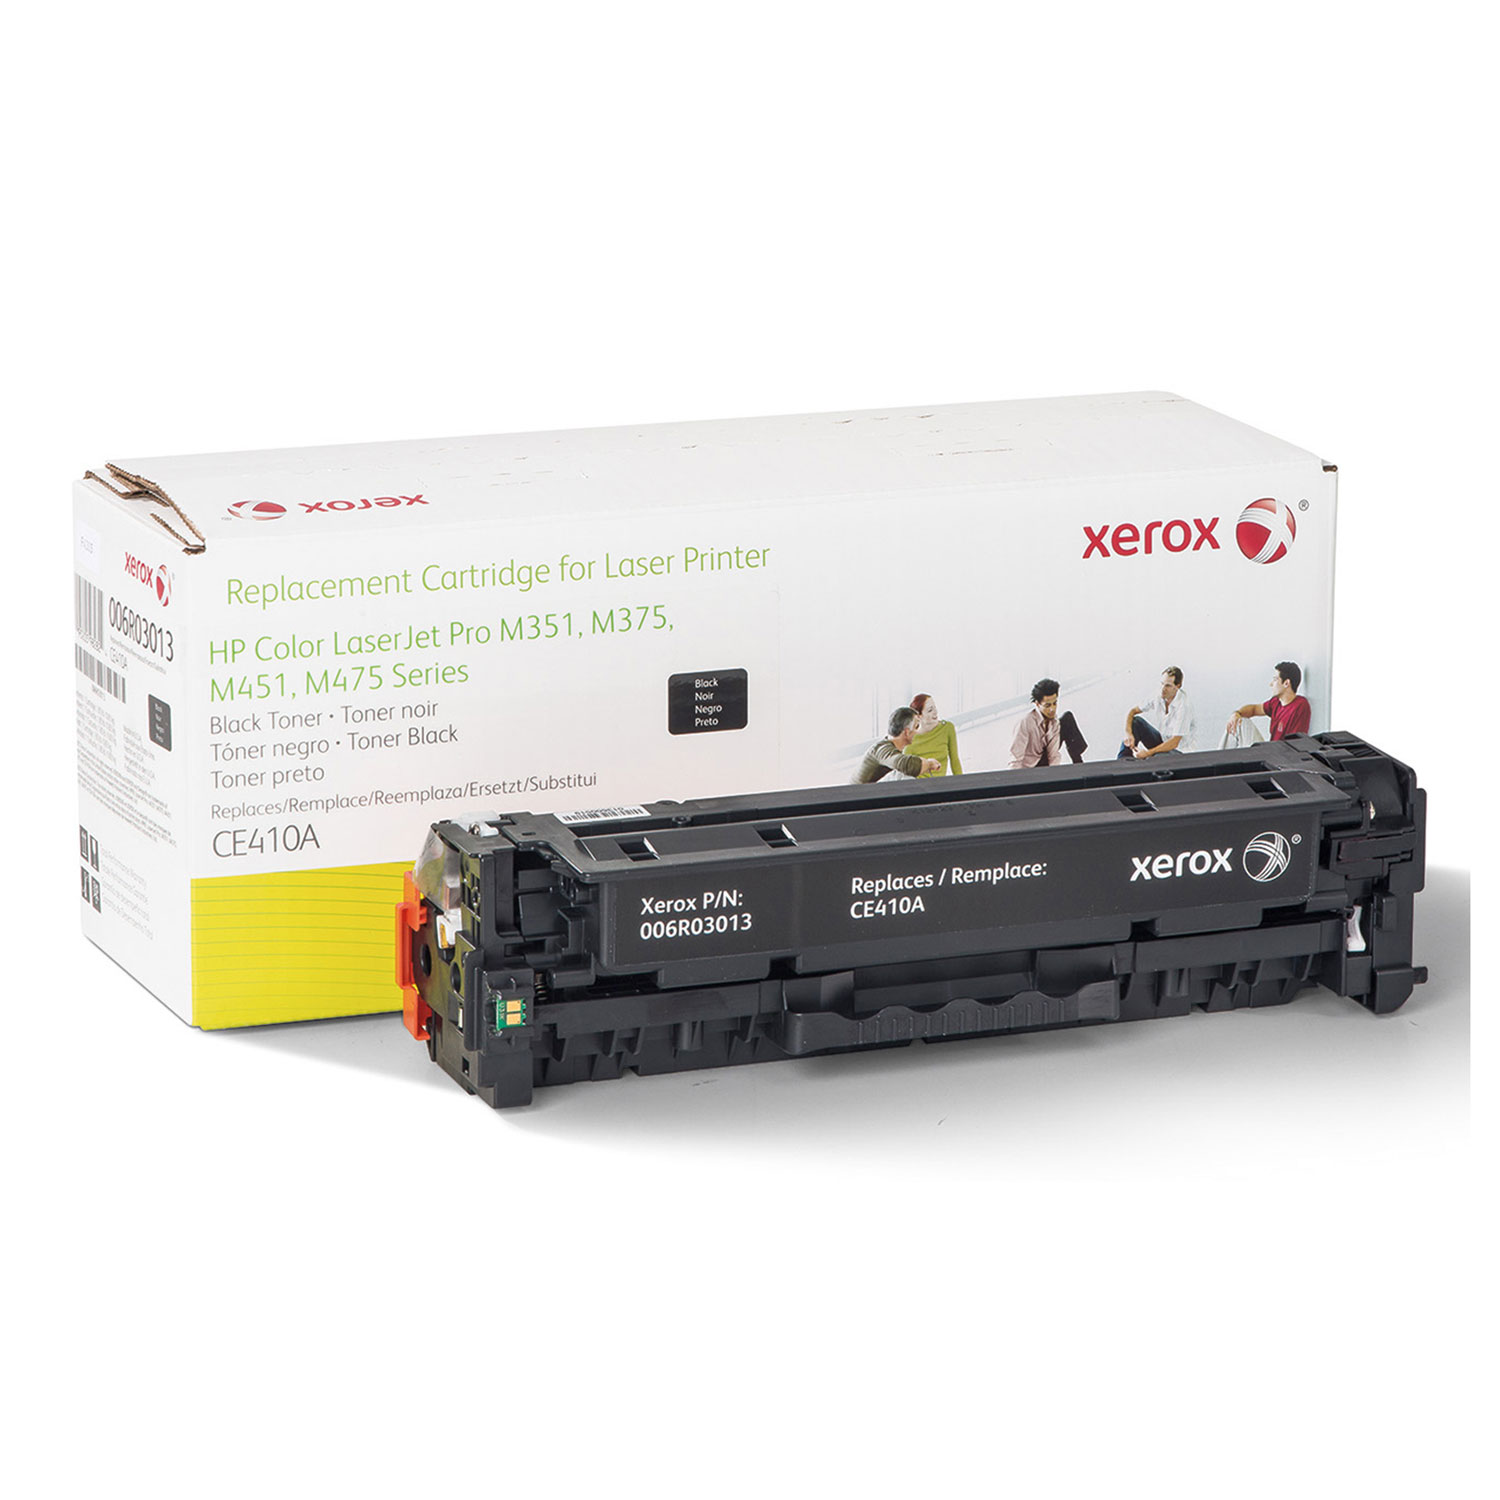  Xerox 006R03013 006R03013 Replacement Toner for CE410A (305A), Black (XER006R03013) 